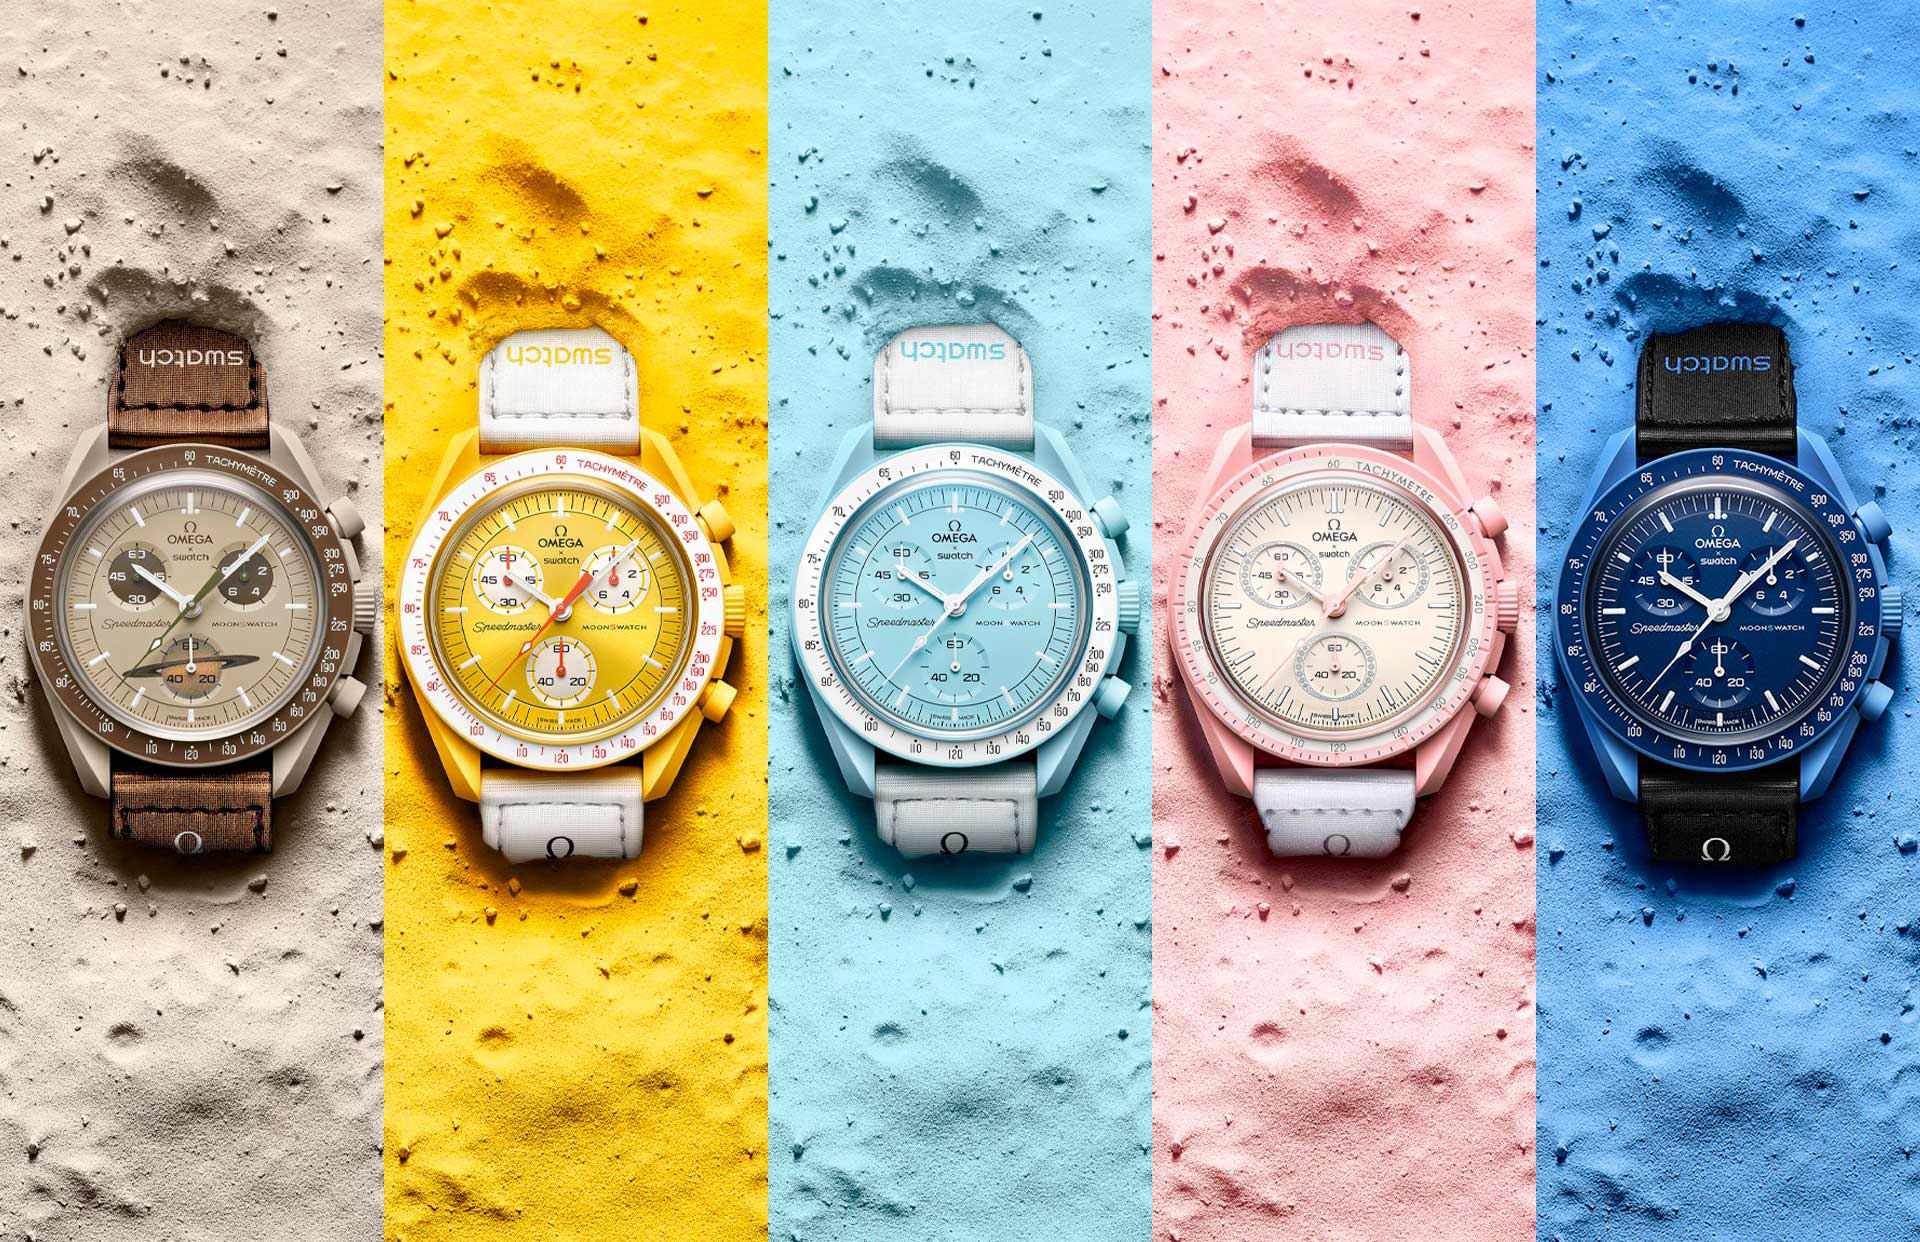 Omega x Swatch MoonSwatch Where You Can Still Find Them